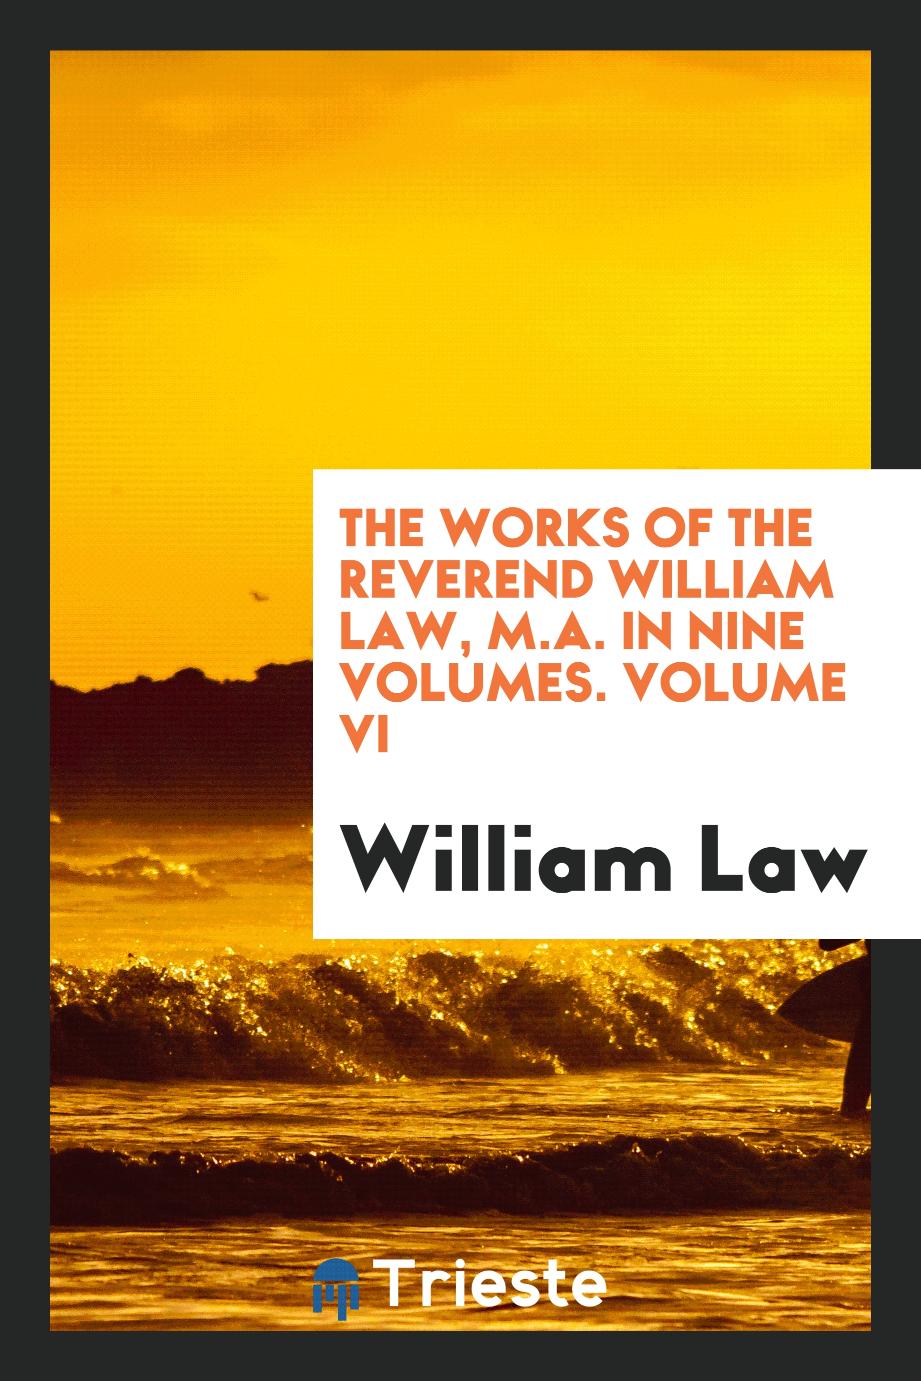 The works of the Reverend William Law, M.A. In nine volumes. Volume VI